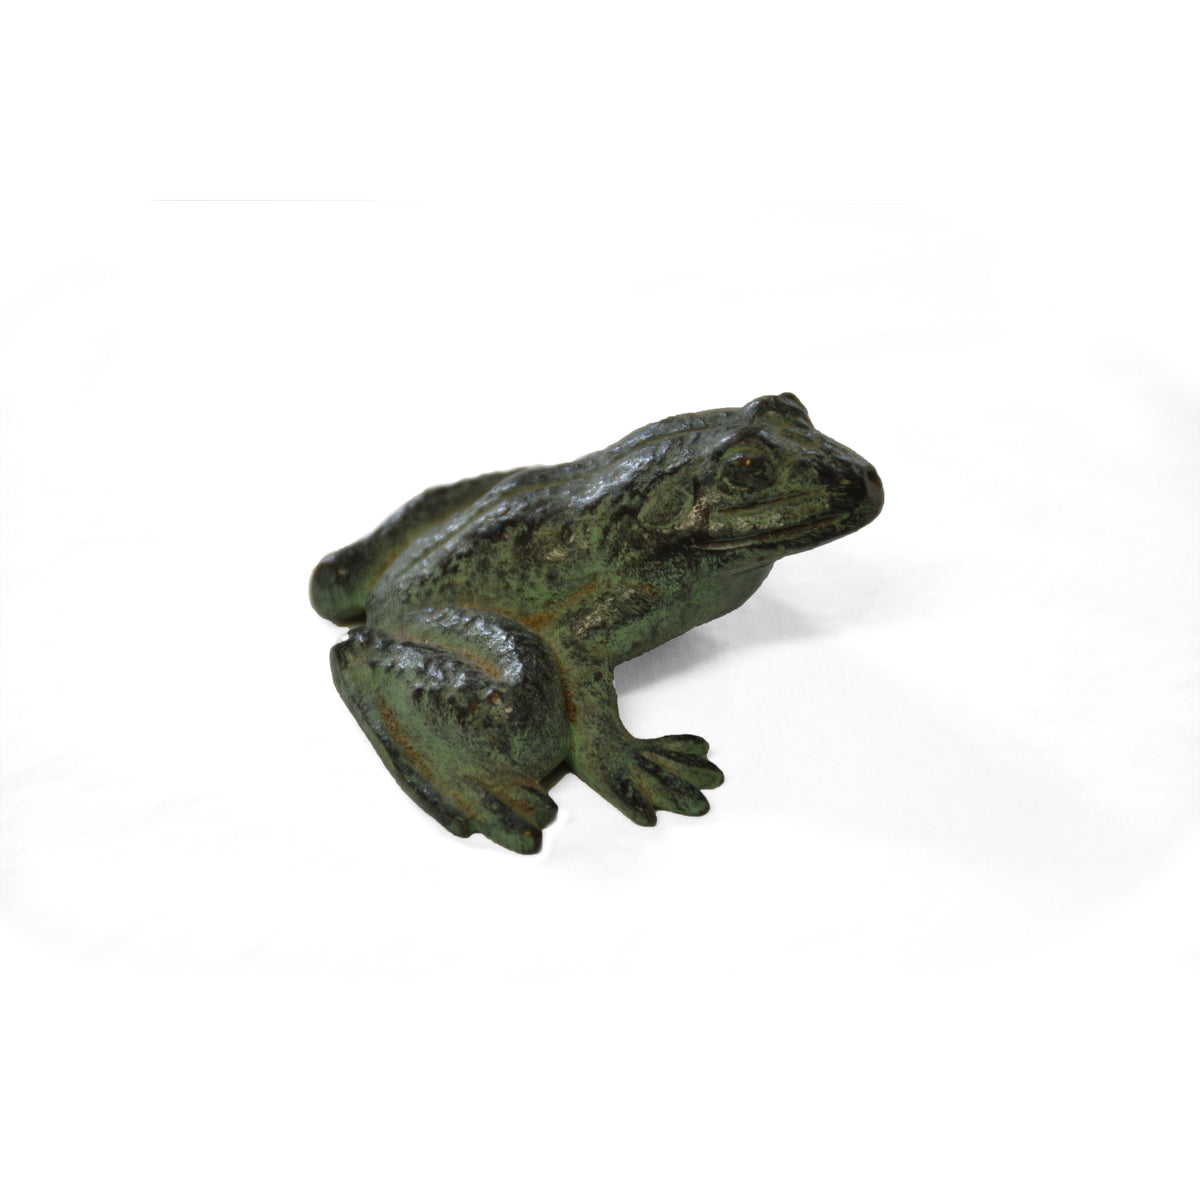 Antique Brass Frog Figurine, Small Frog Ornament, Collectable